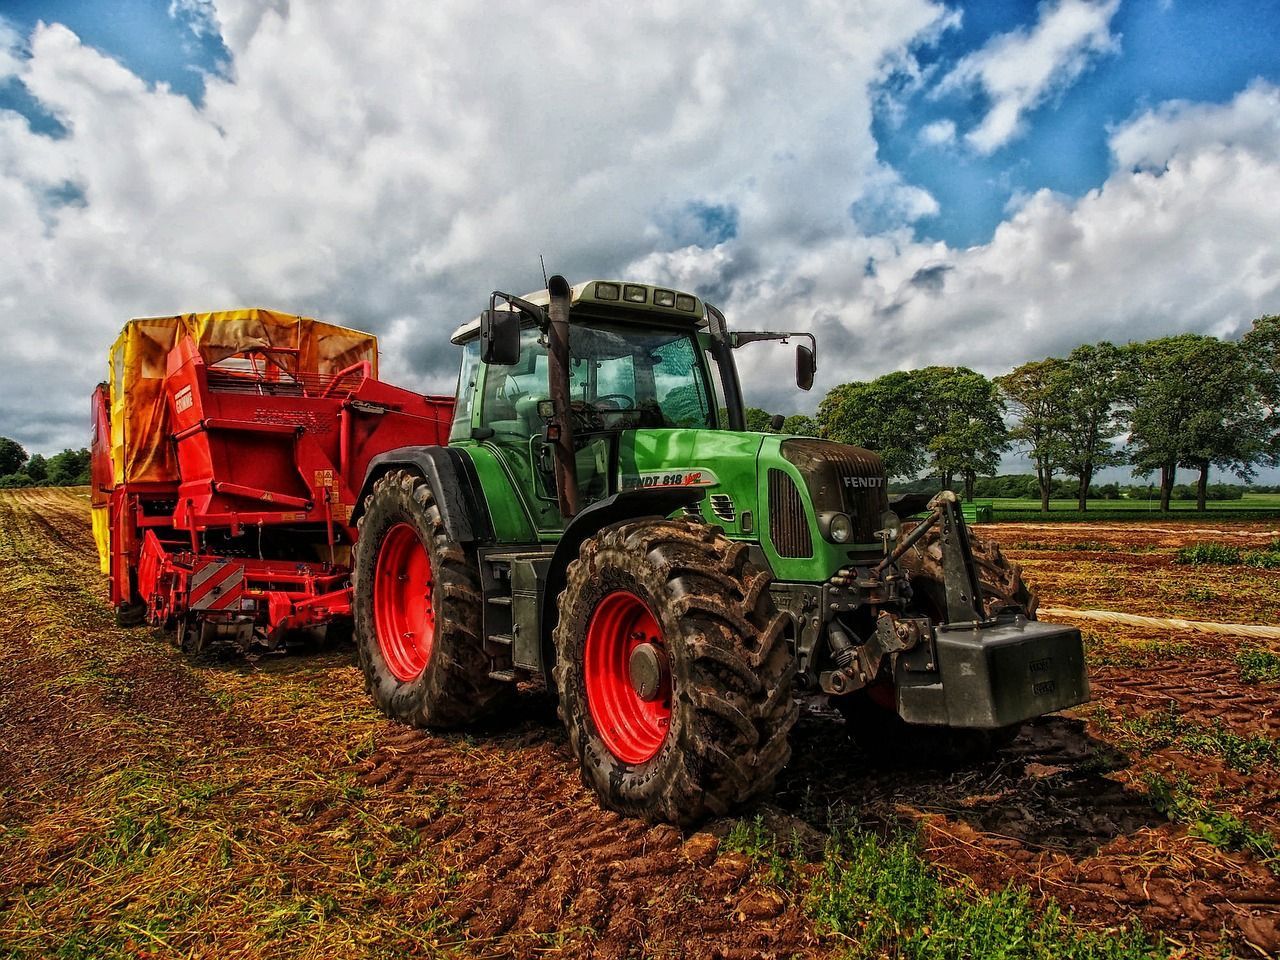 tractor-g7c49673ae_1280